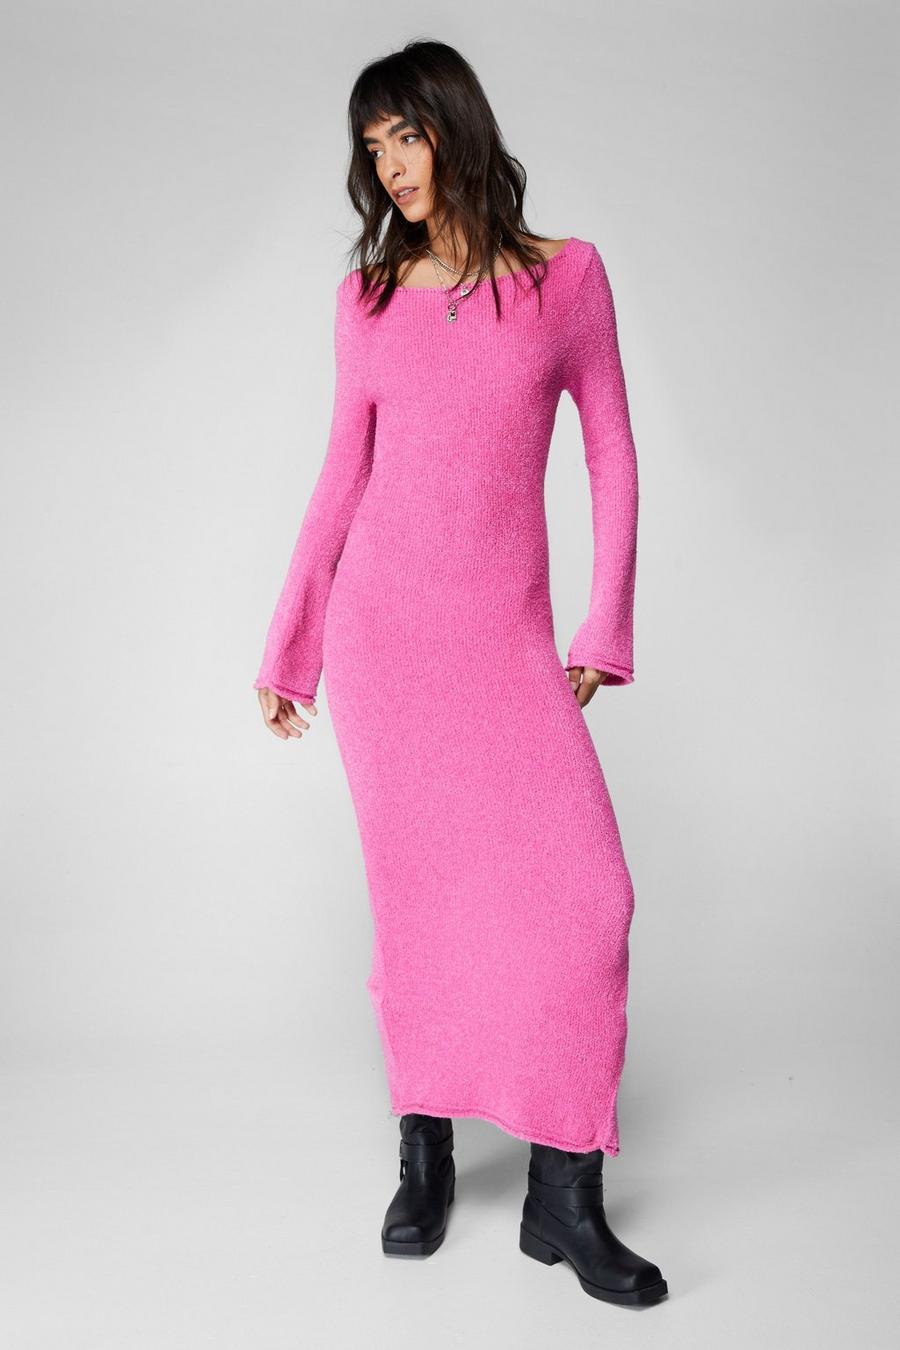 Long Sleeve Dresses, Dresses With Sleeves